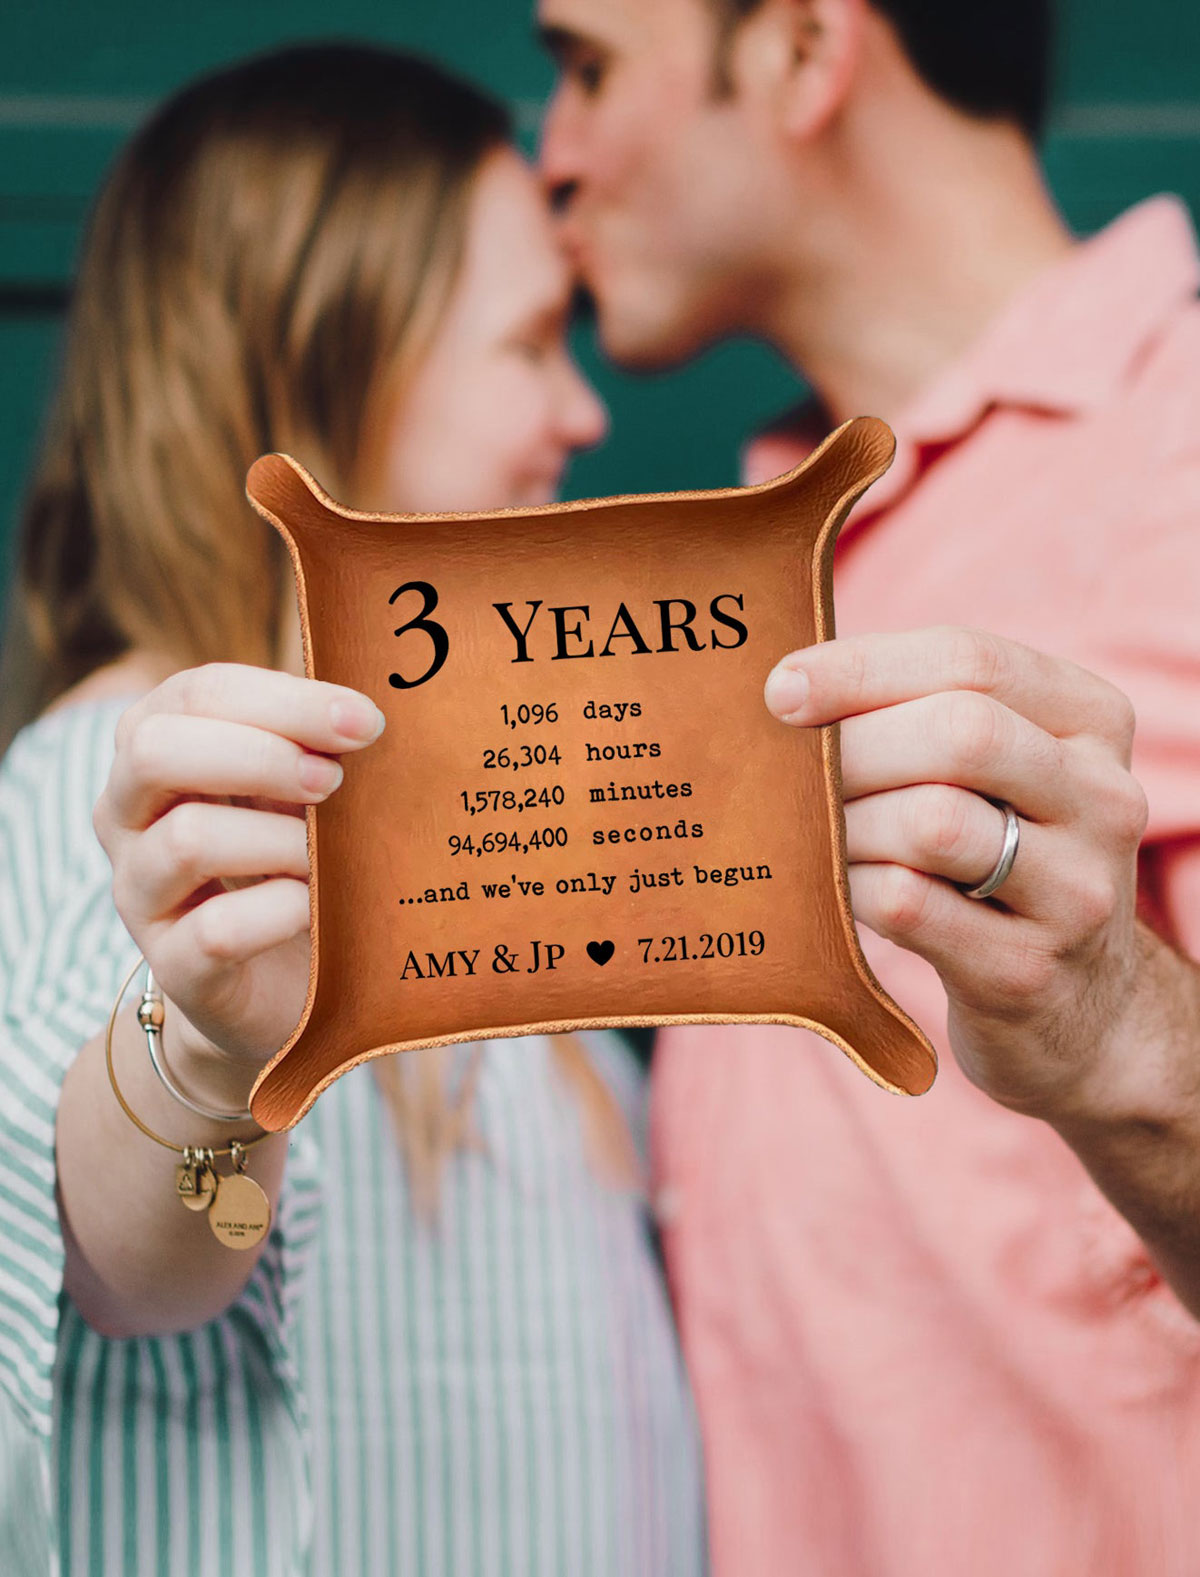 105+ Personalized Anniversary Gifts (Free & Paid)